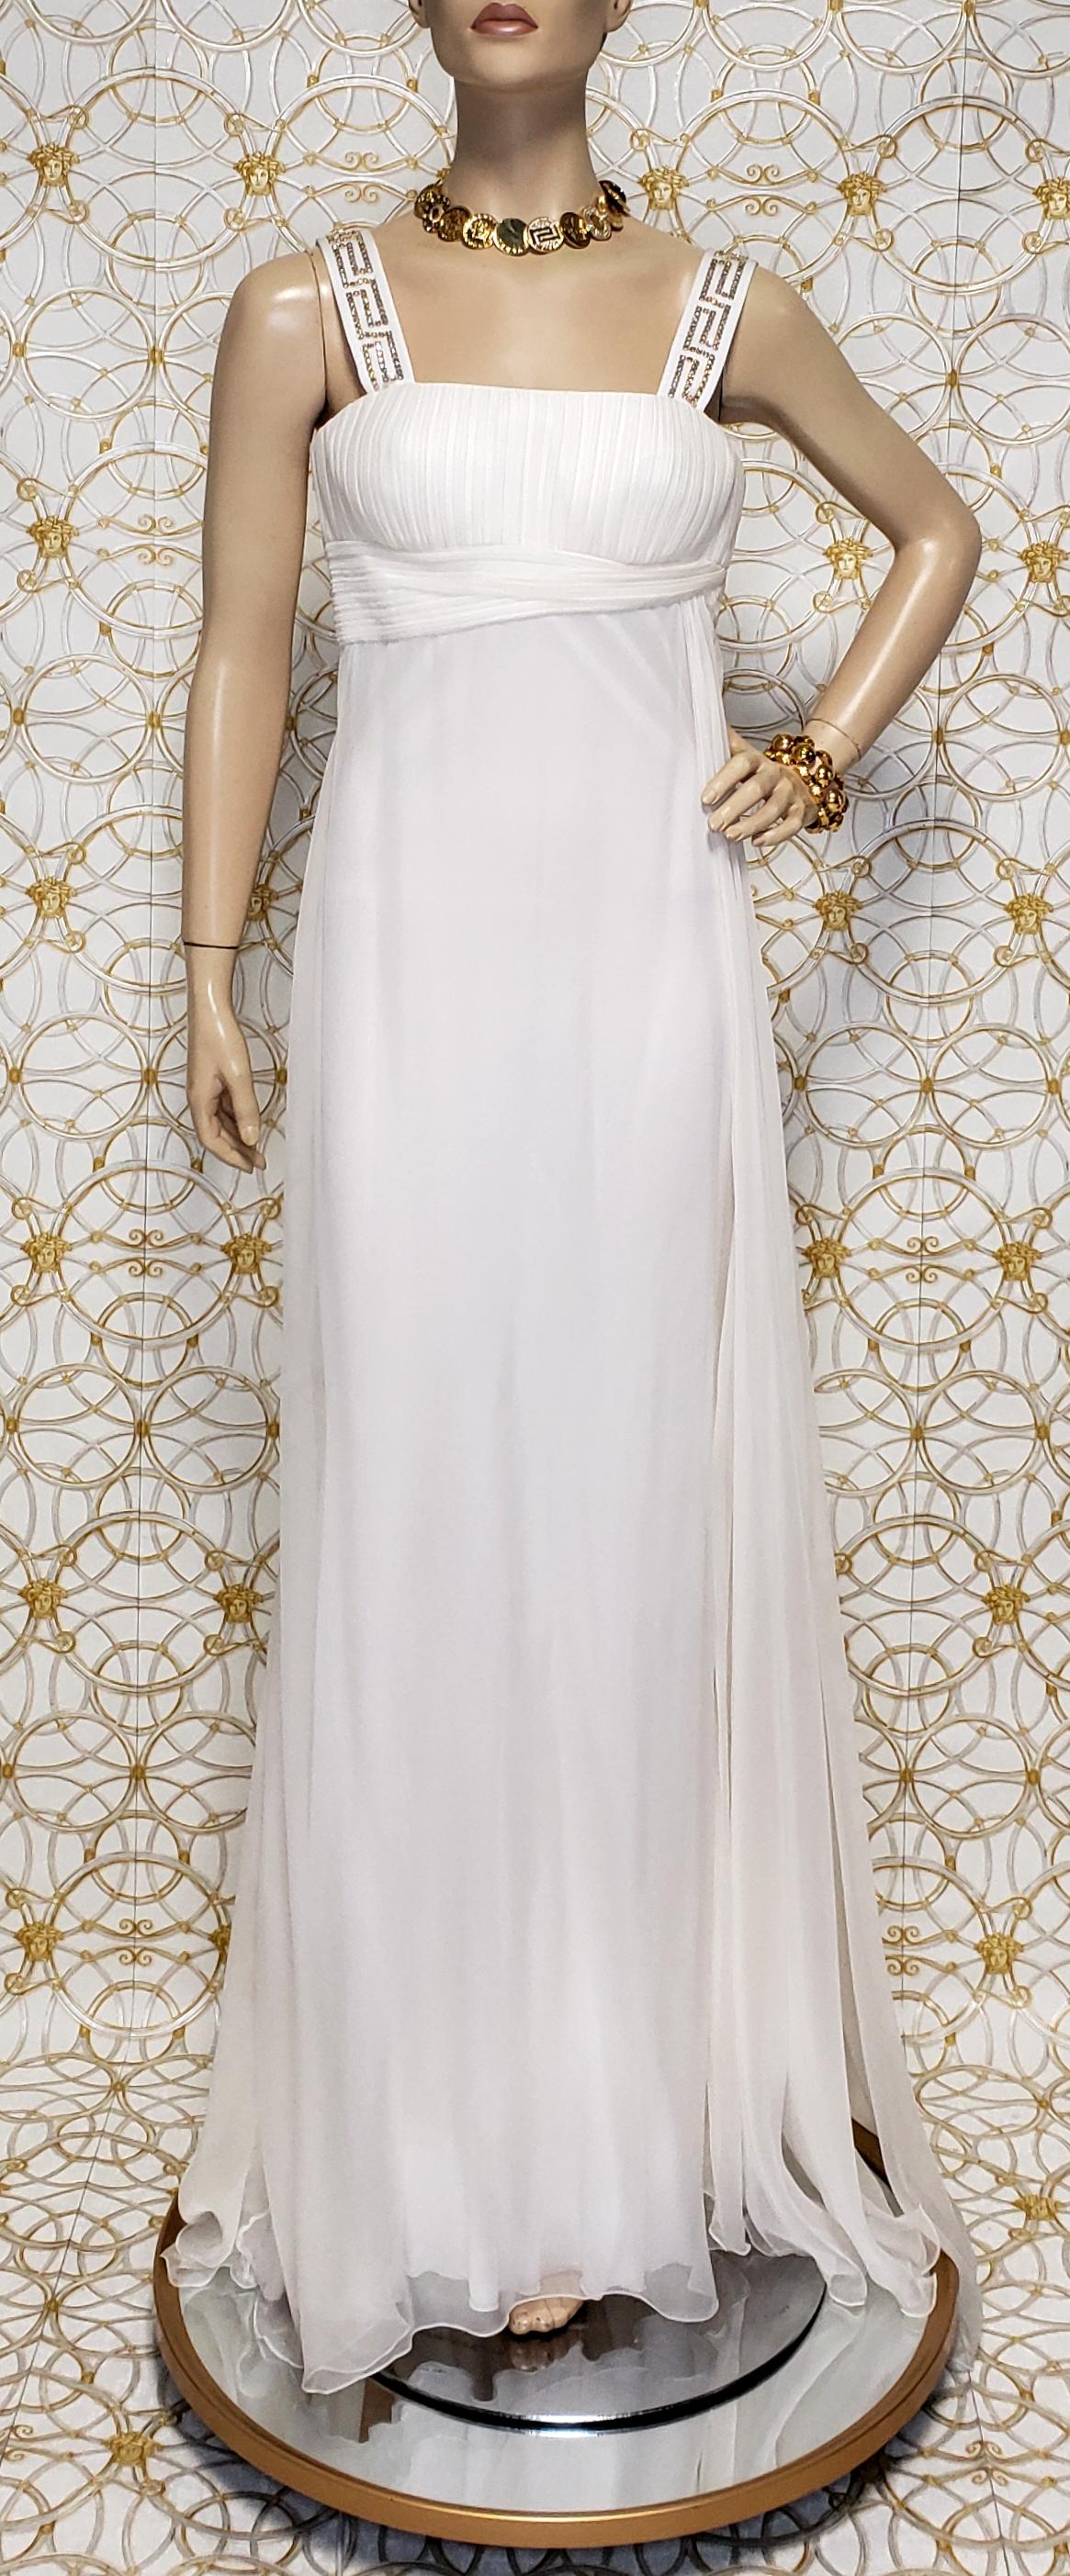 New Versace Crystal Embellished White Silk Gown 44 - 8 In New Condition For Sale In Montgomery, TX